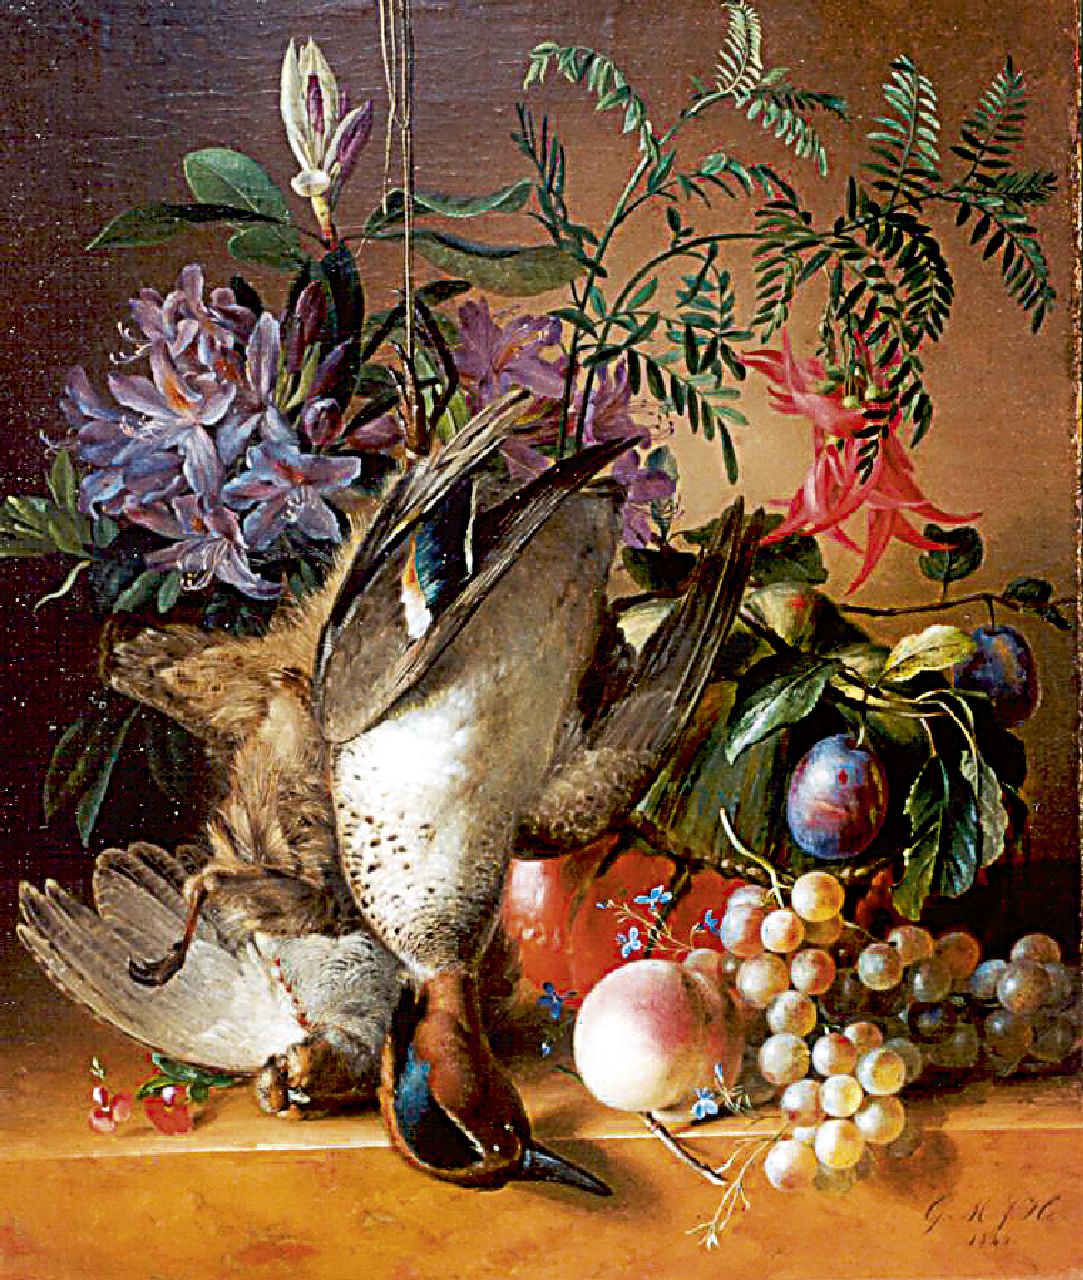 Huidekoper G.M.J.  | Geertruida Margaretha Jacoba Huidekoper, A still life with flowers, fruits and dead game, oil on canvas laid down on panel 54.2 x 46.3 cm, signed l.r. with initials and dated 1844